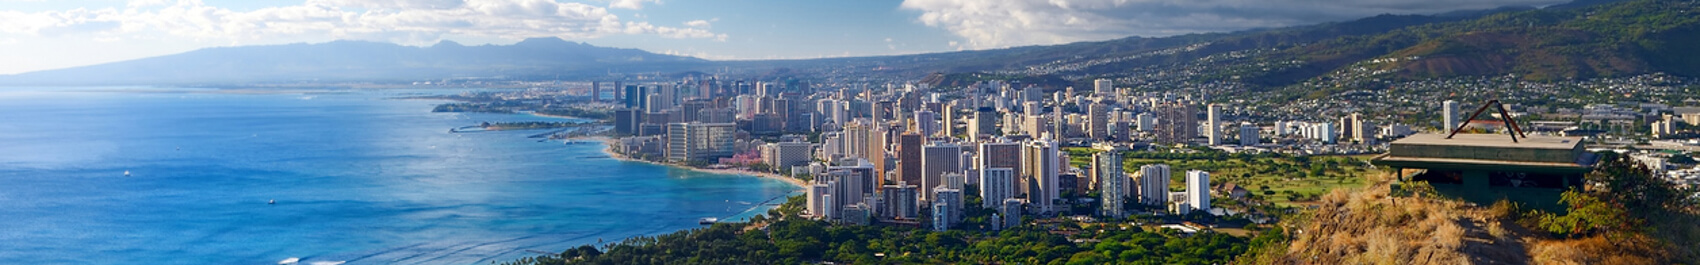 Waikiki beach and shoreline on the left with buildings of Honolulu on the right